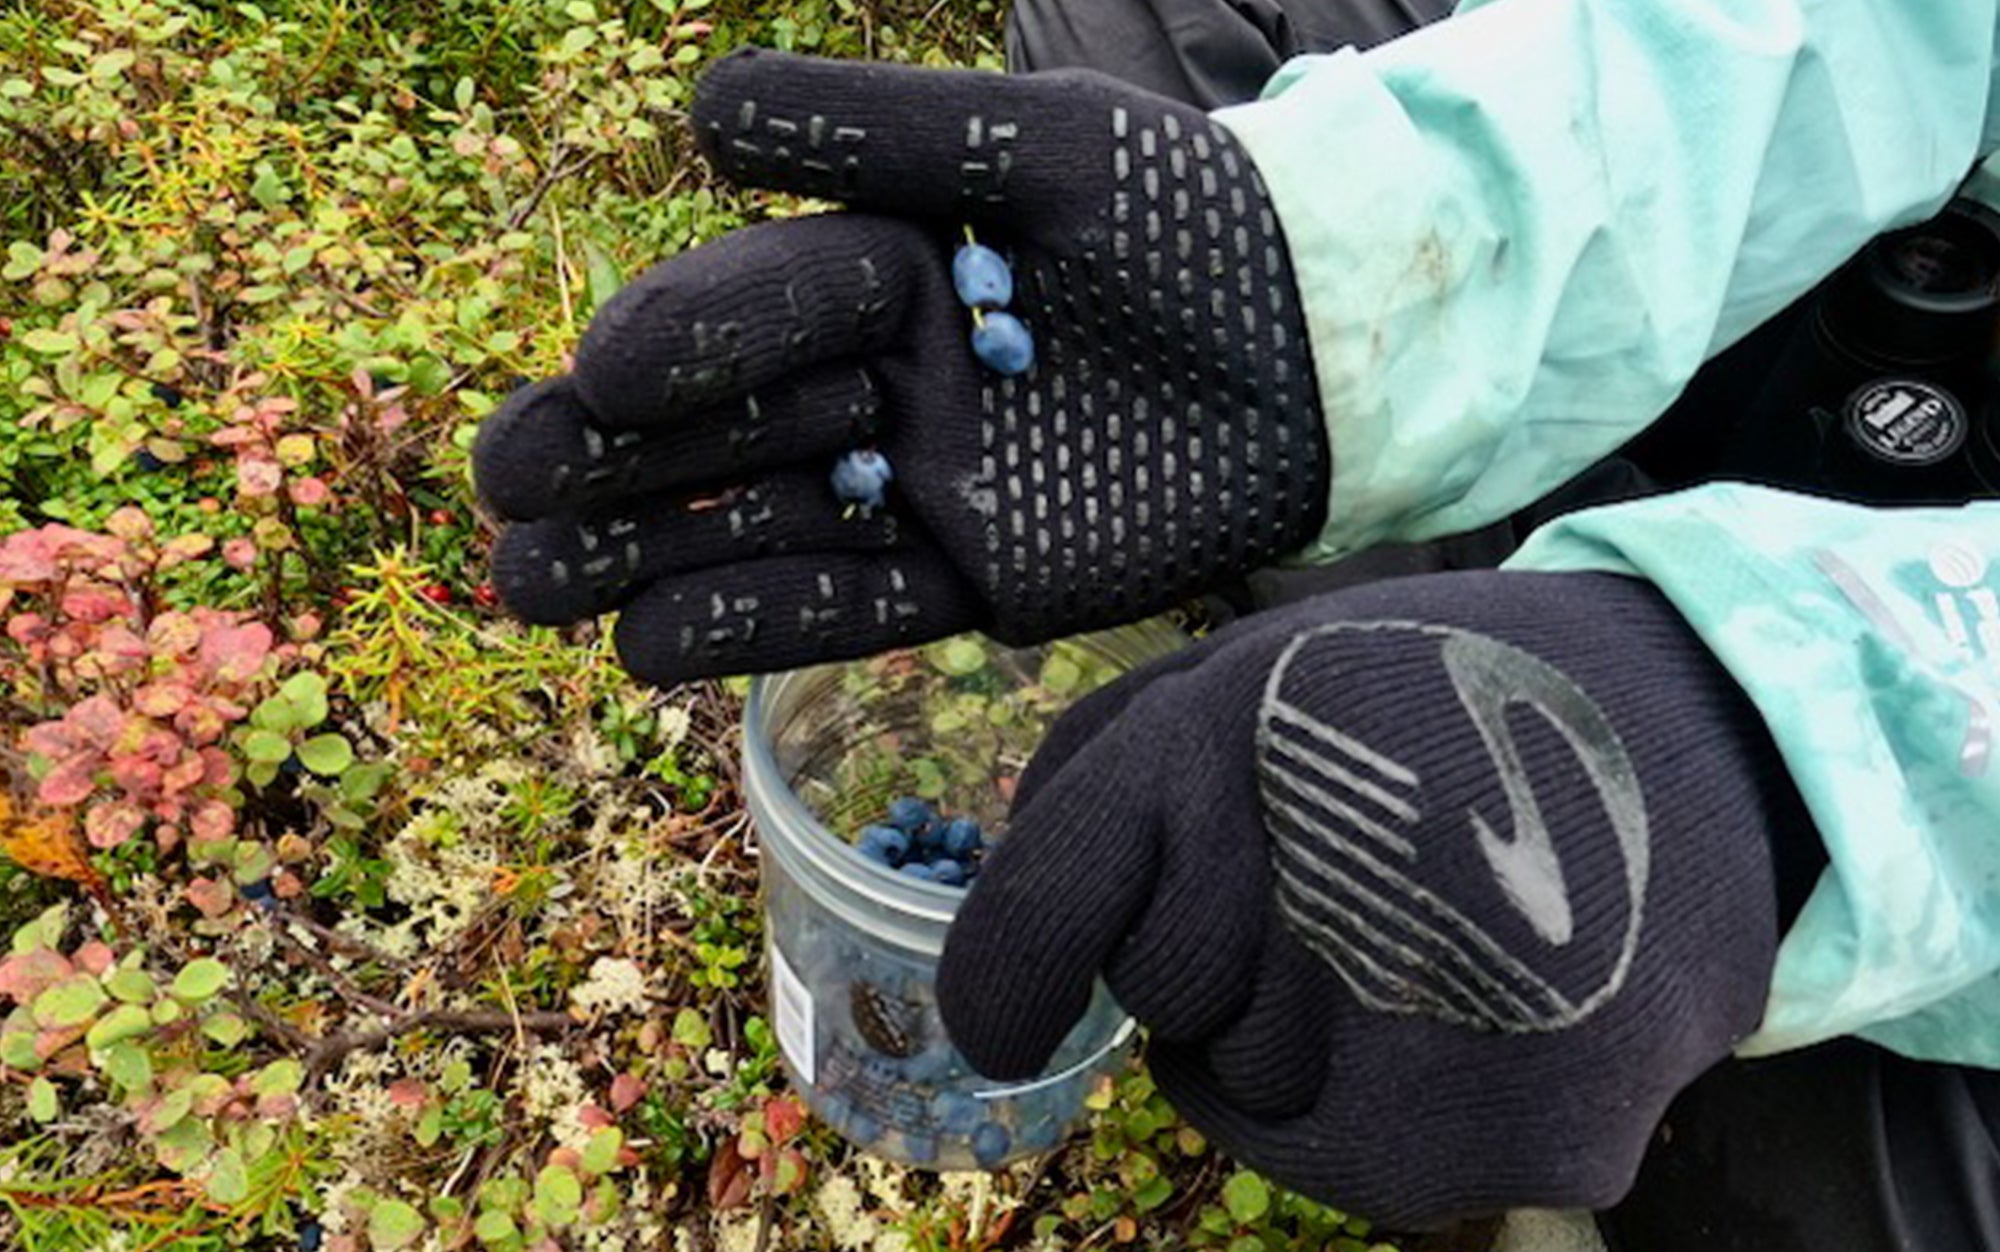 Testers picked berries in the Showers Pass gloves.